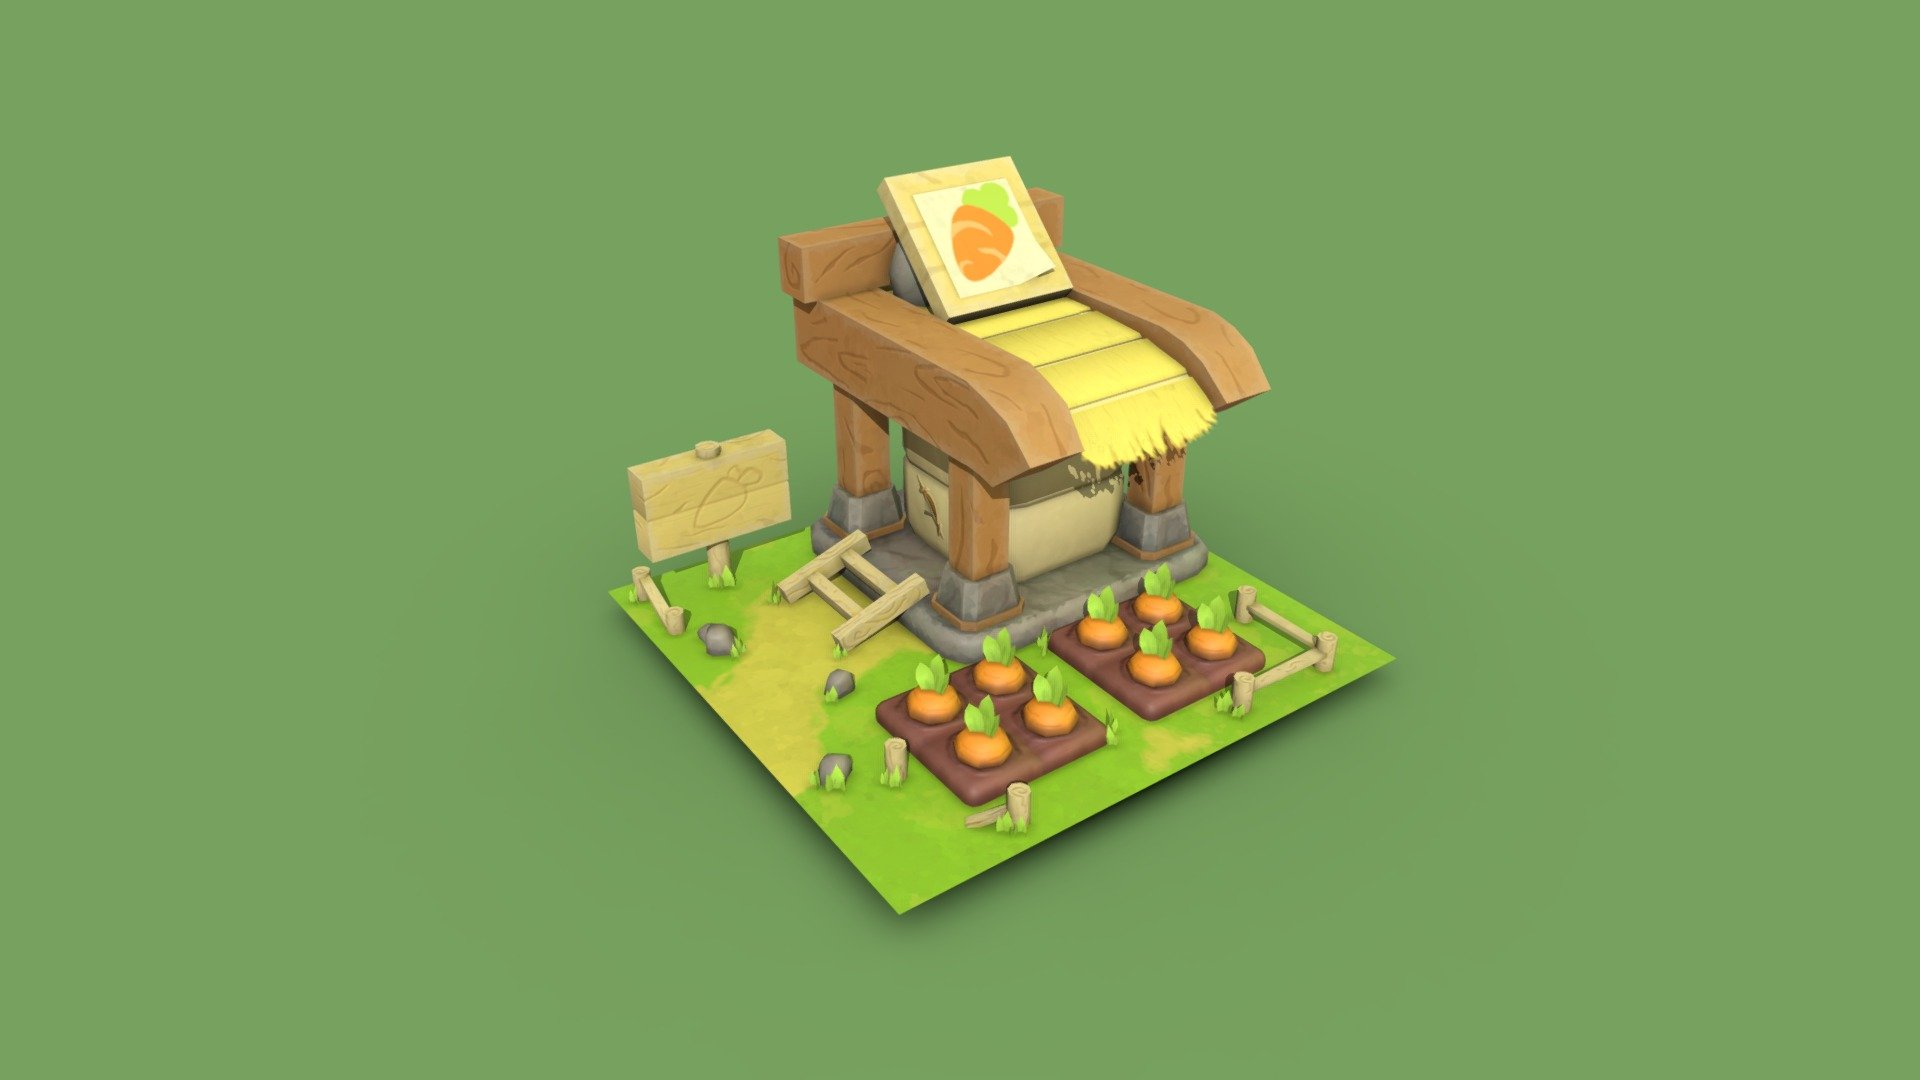 Game ready 3d model
My 3d model made according to the reference.

The 3D model is optimized and ready to run in the game.

Ready for use in mobile and desktop games.

This 3D model is suitable for:
- Close-ups
- Illustrations and various renderers
- Games

Textures set in 4K.

Thanks for watching! - Carrot Farm | Low Poly | For a mobile game 3d model